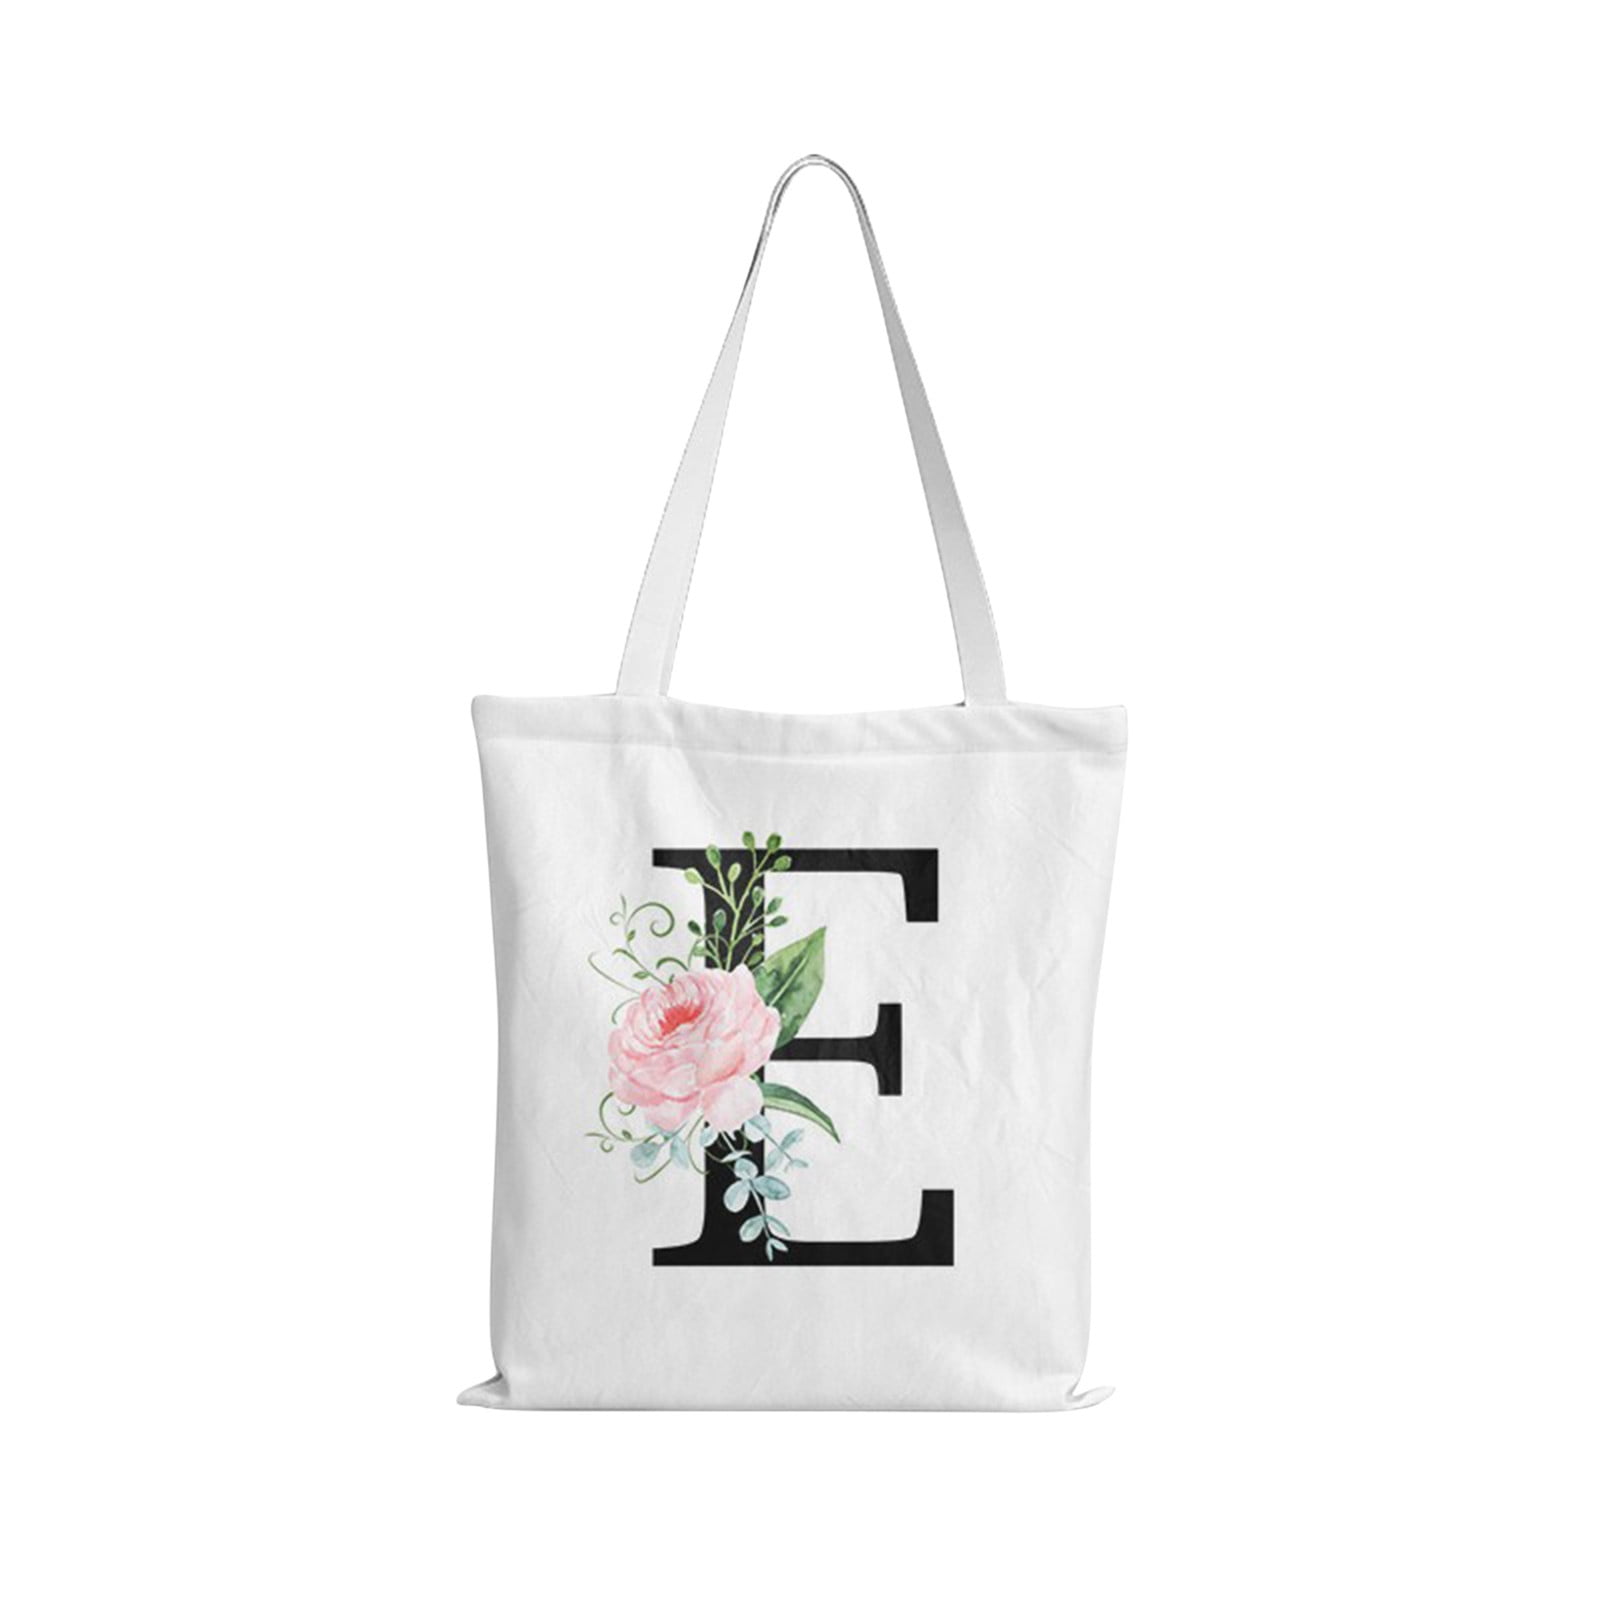 Initial Canvas Grocery Bag, Personalized Present Gift Tote Bag for Wedding  Birthday Holiday Reusable Grocery Bag Initial Letters for Women Teachers